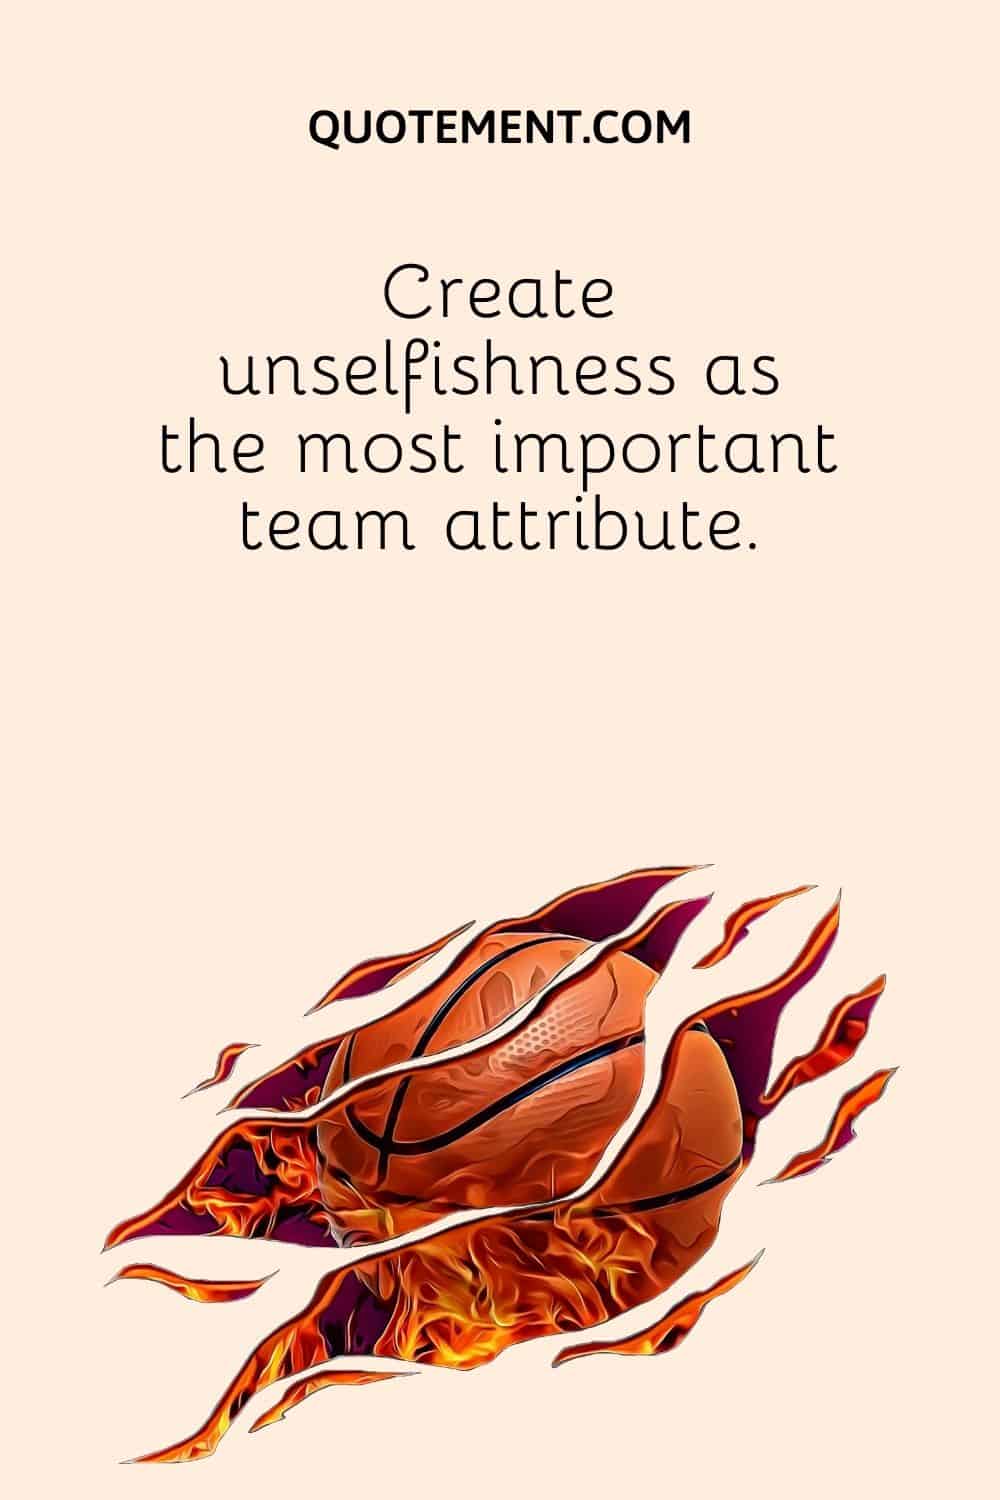 Create unselfishness as the most important team attribute